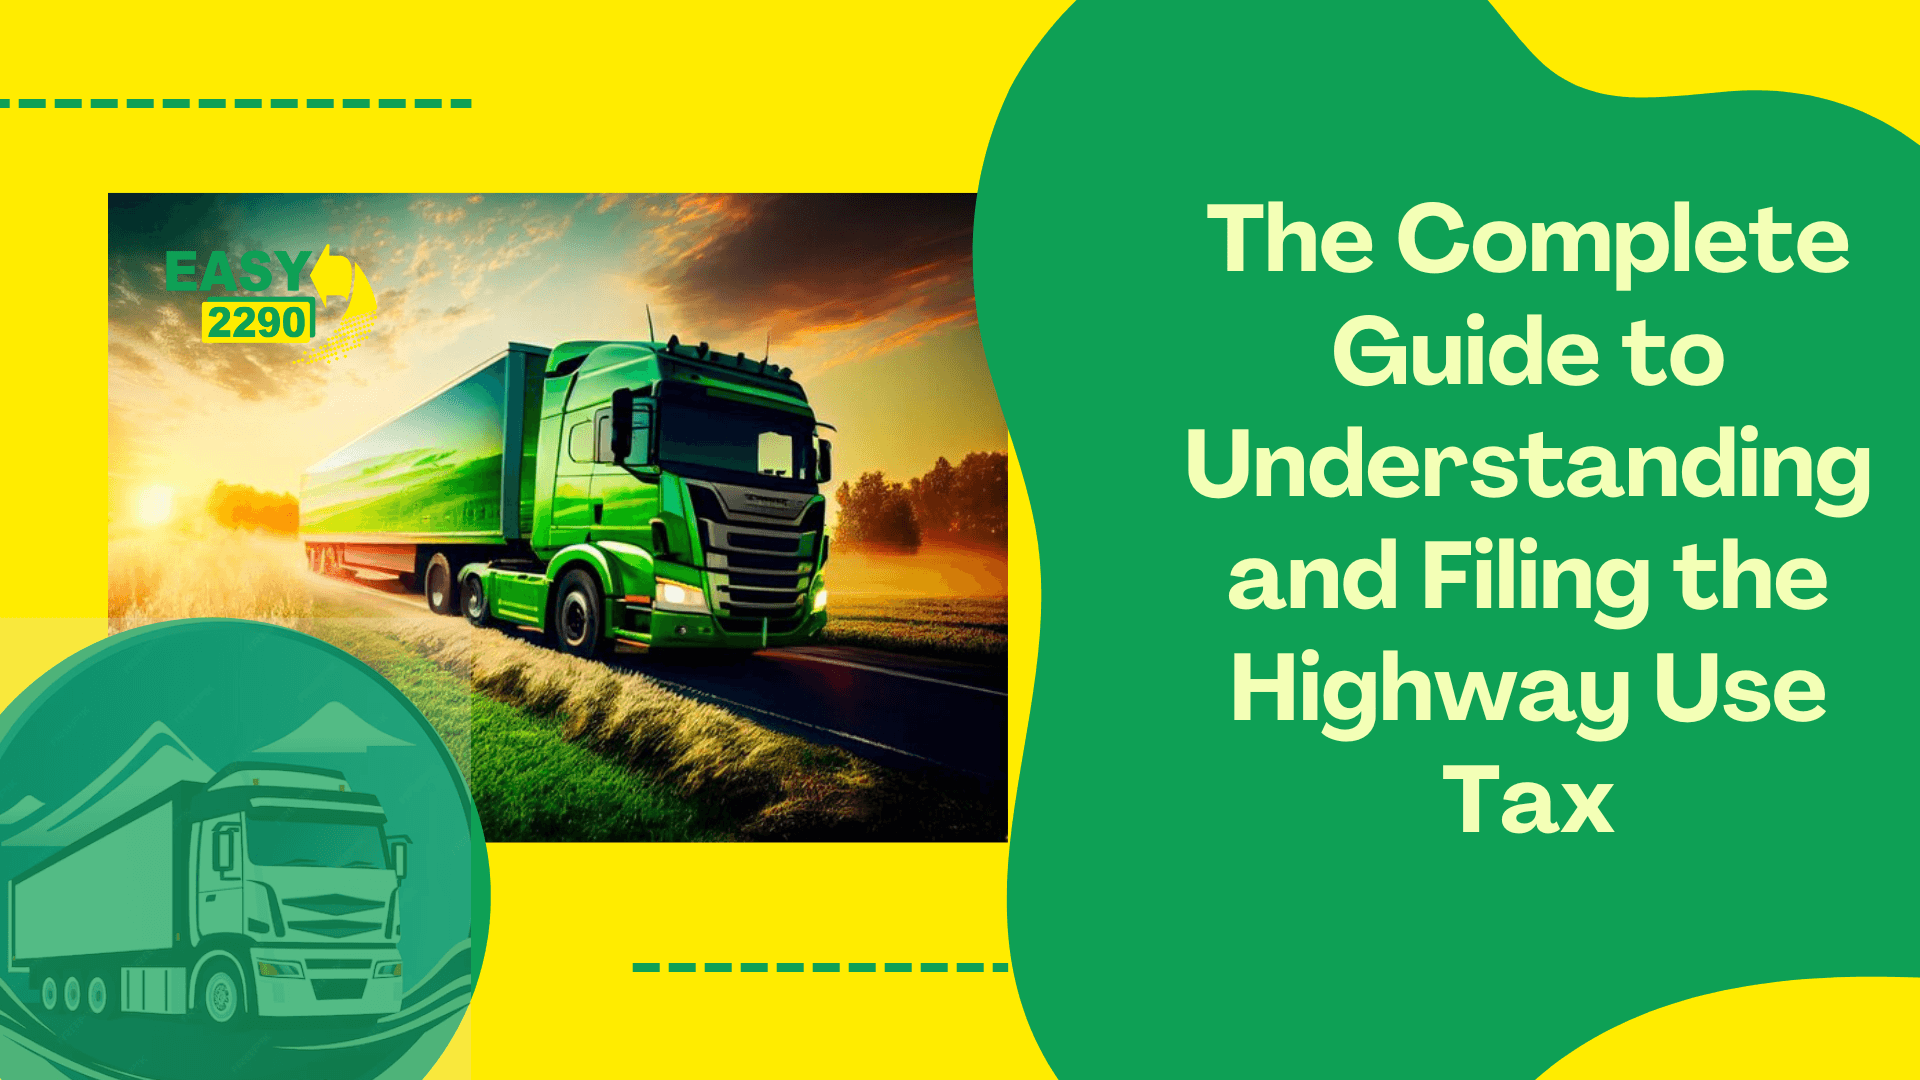 The Complete Guide to Understanding and Filing the Highway Use Tax